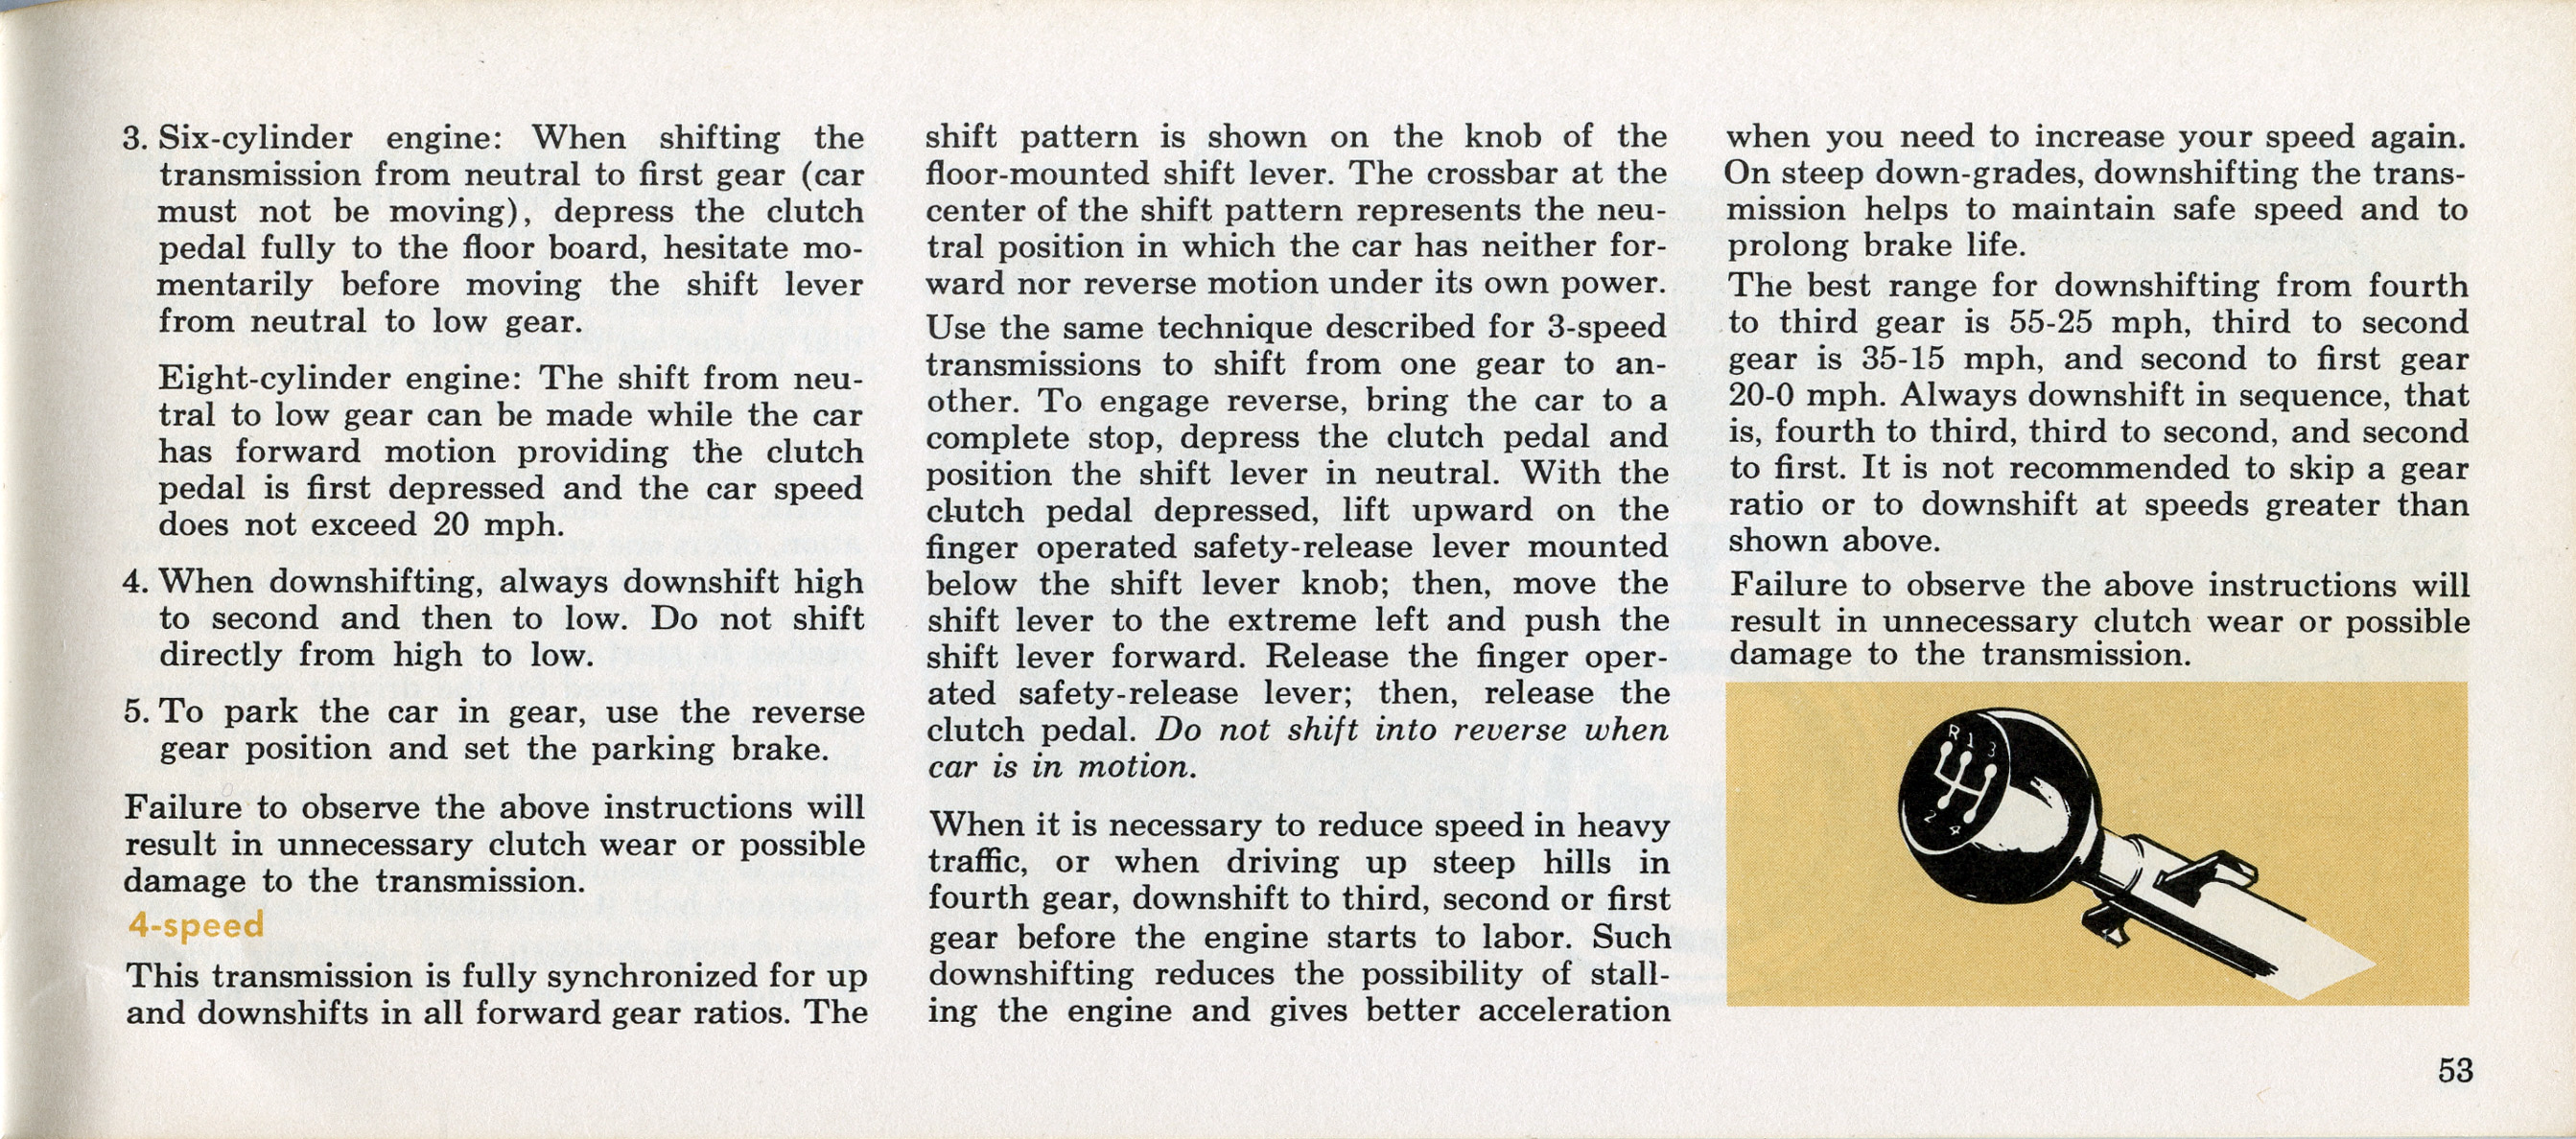 1964 Ford Falcon Owners Manual Page 28